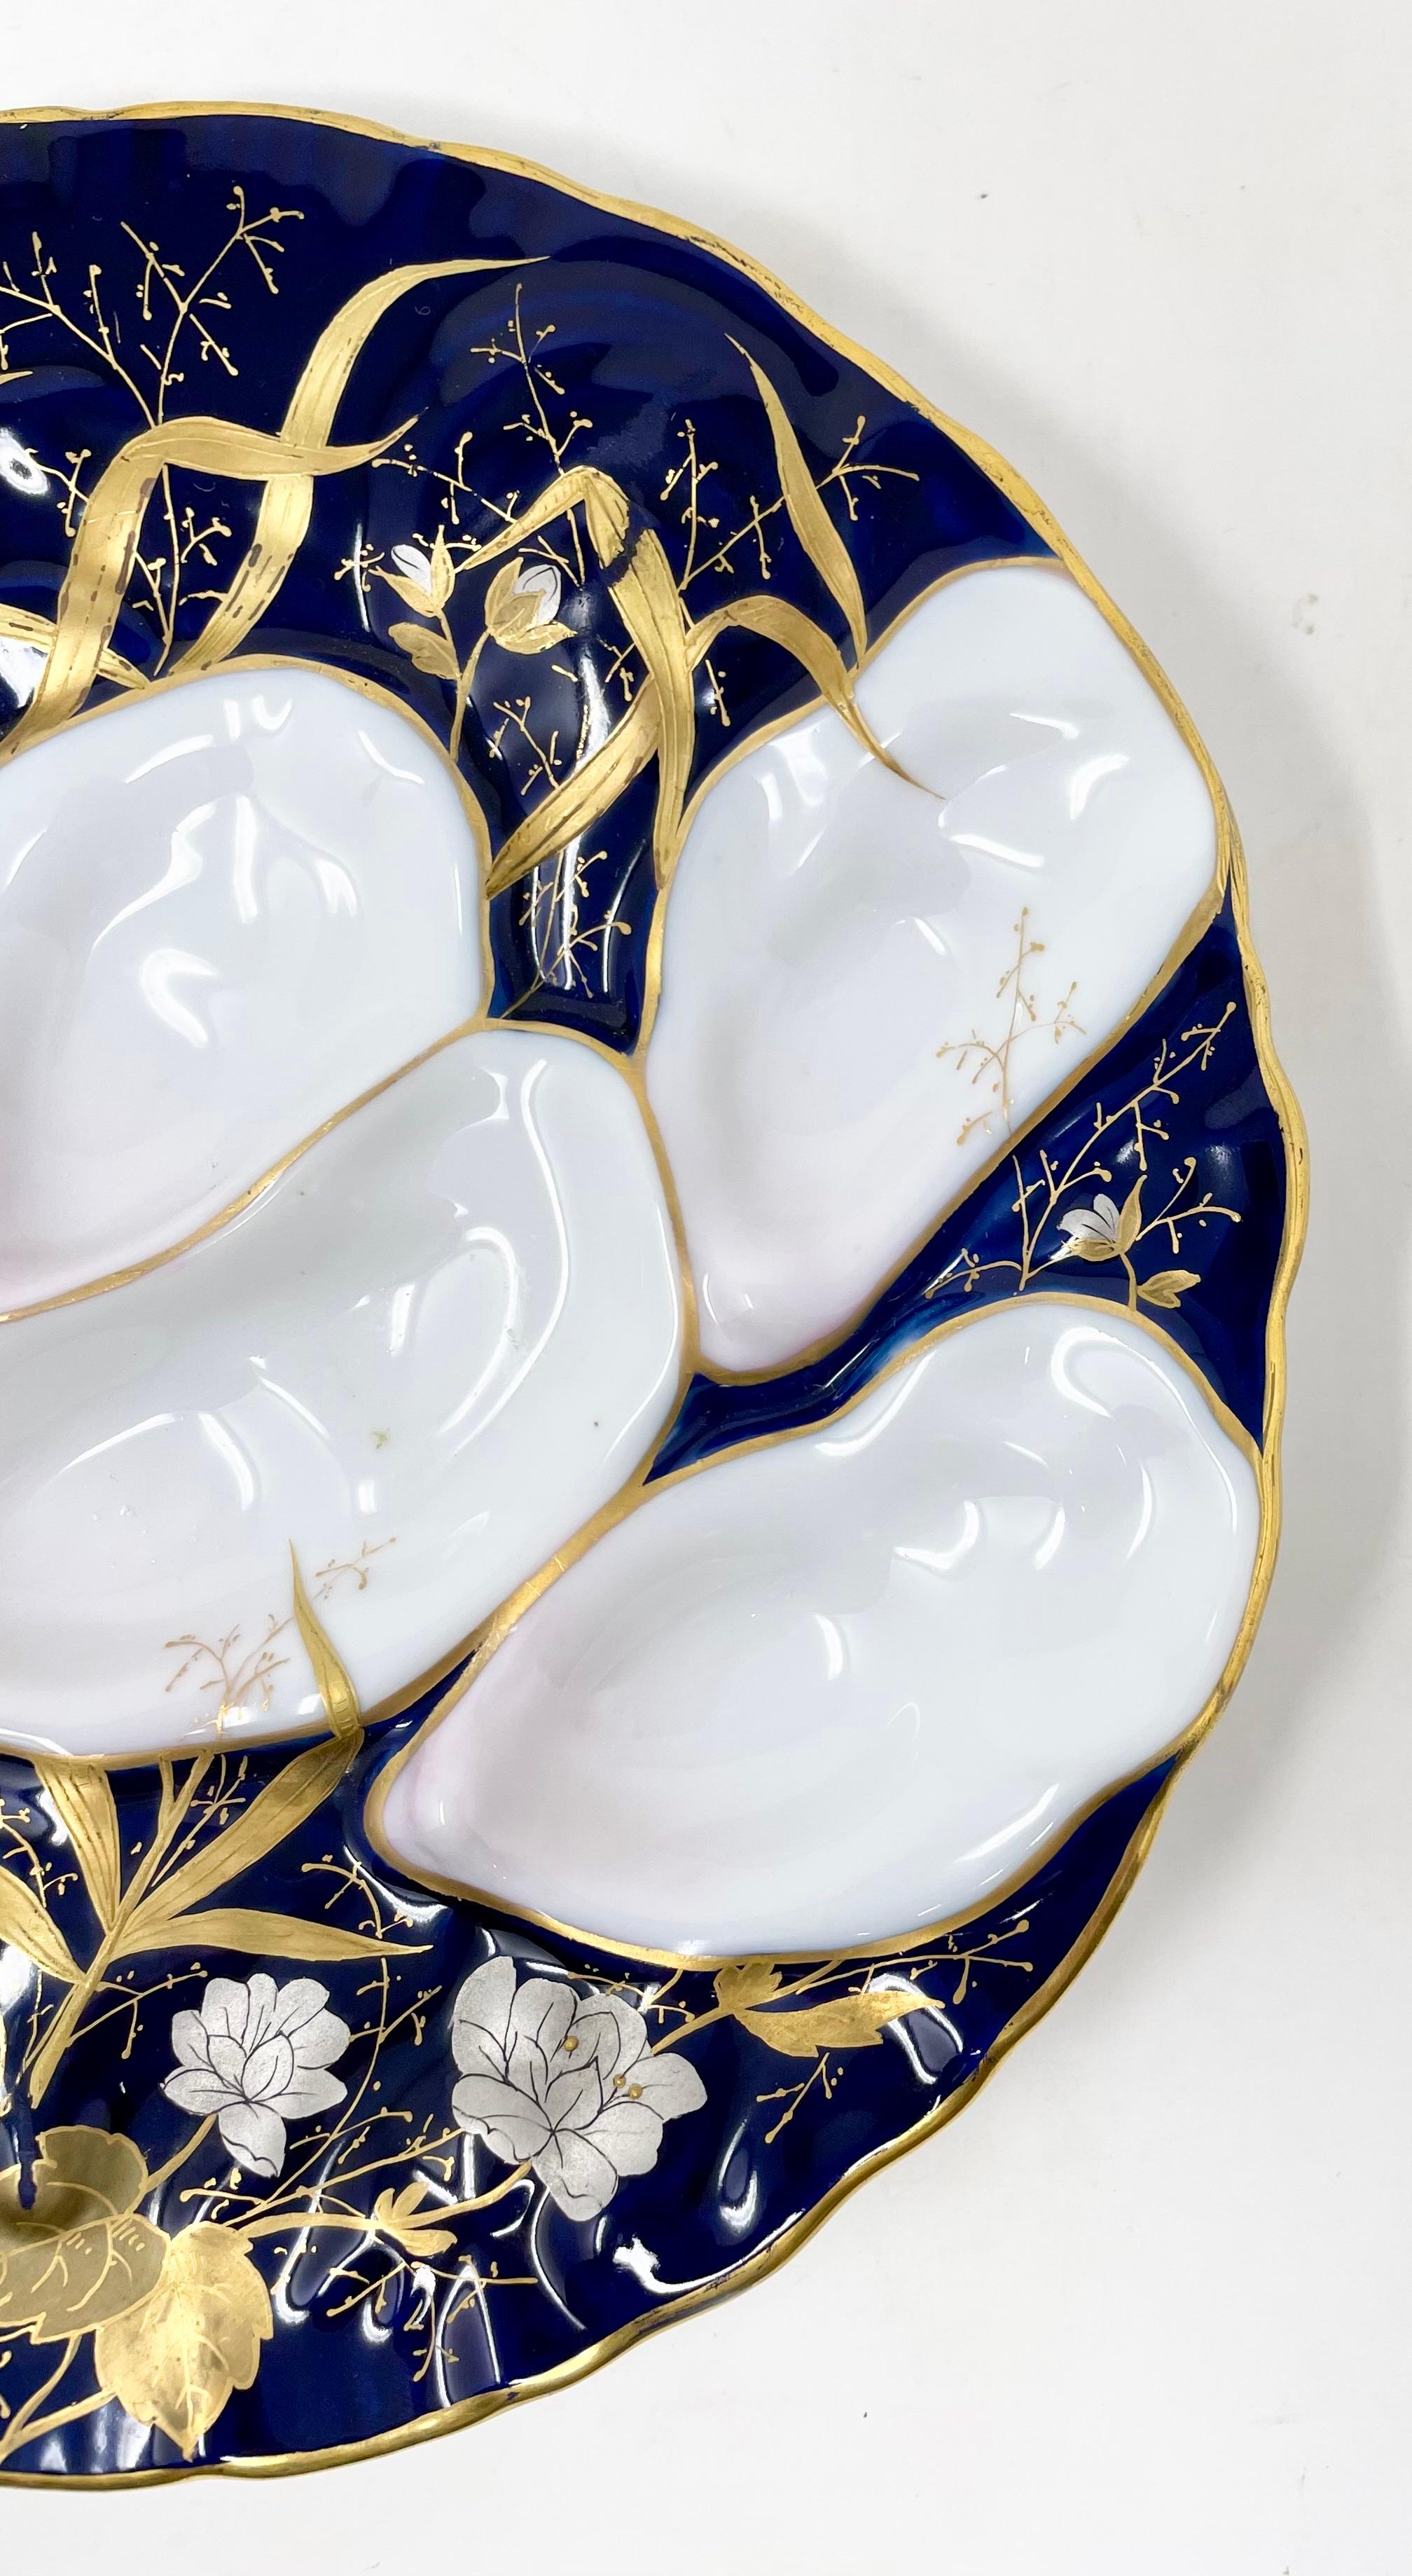 Antique German Art Nouveau Design Hand-Painted Porcelain Turkey Pattern Oyster Plate, Circa 1900.
Beautiful design of sea grasses and flowers in cobalt blue, periwinkle, gold and white.